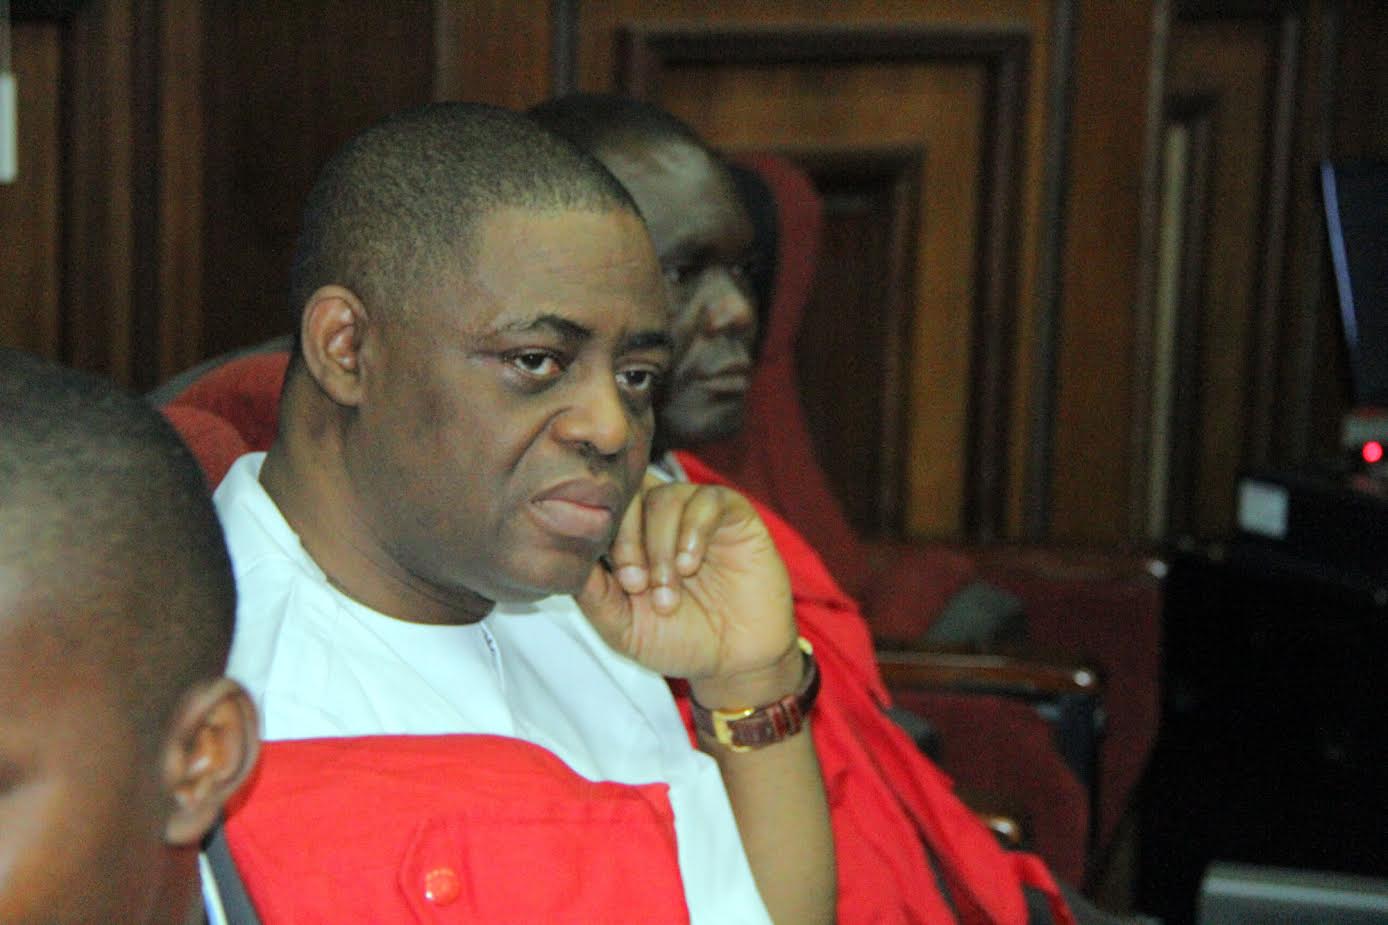 Demons in APC have joined PDP – Fani-Kayode